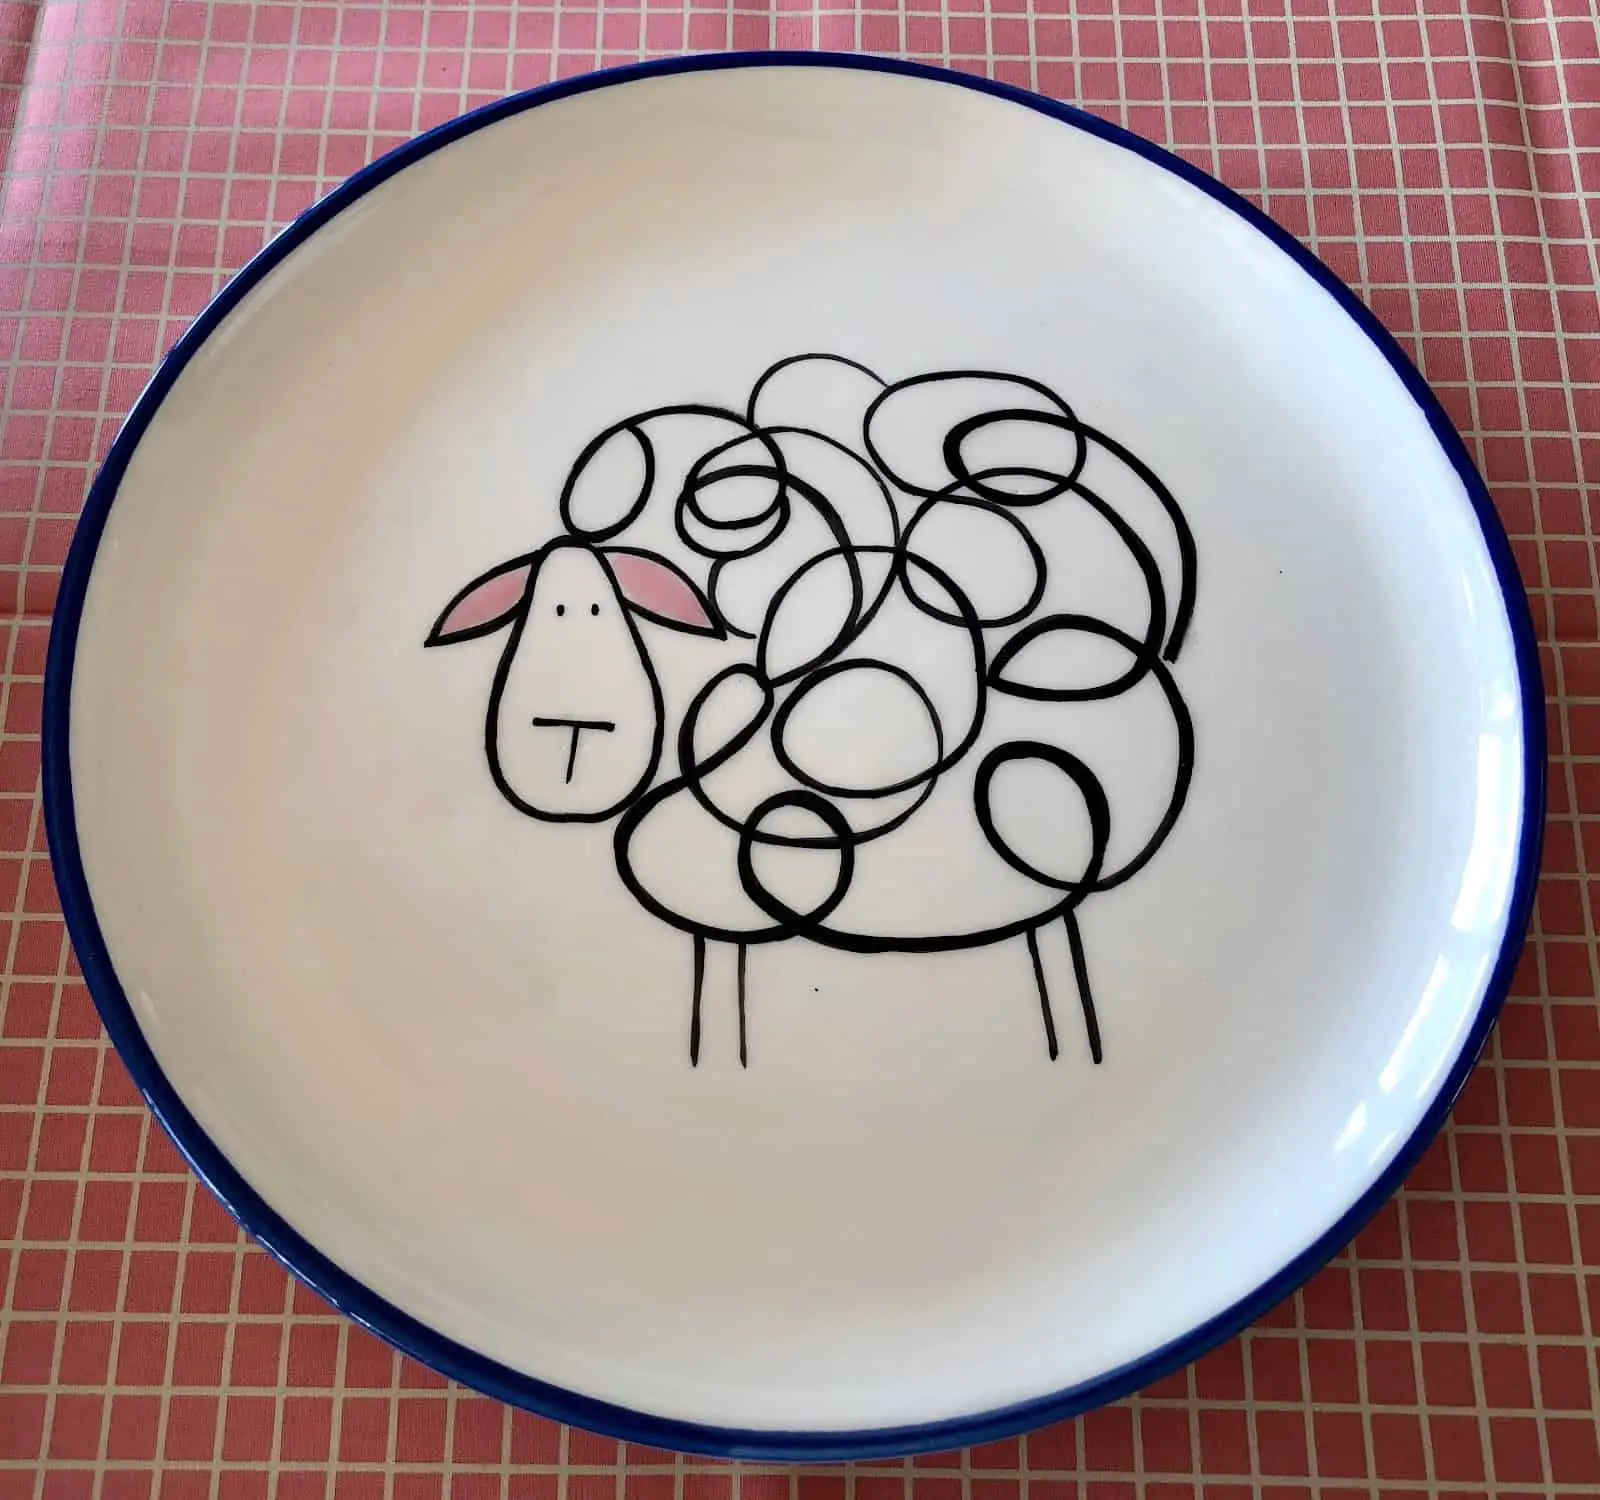 Wooly-Sheep Plate Design